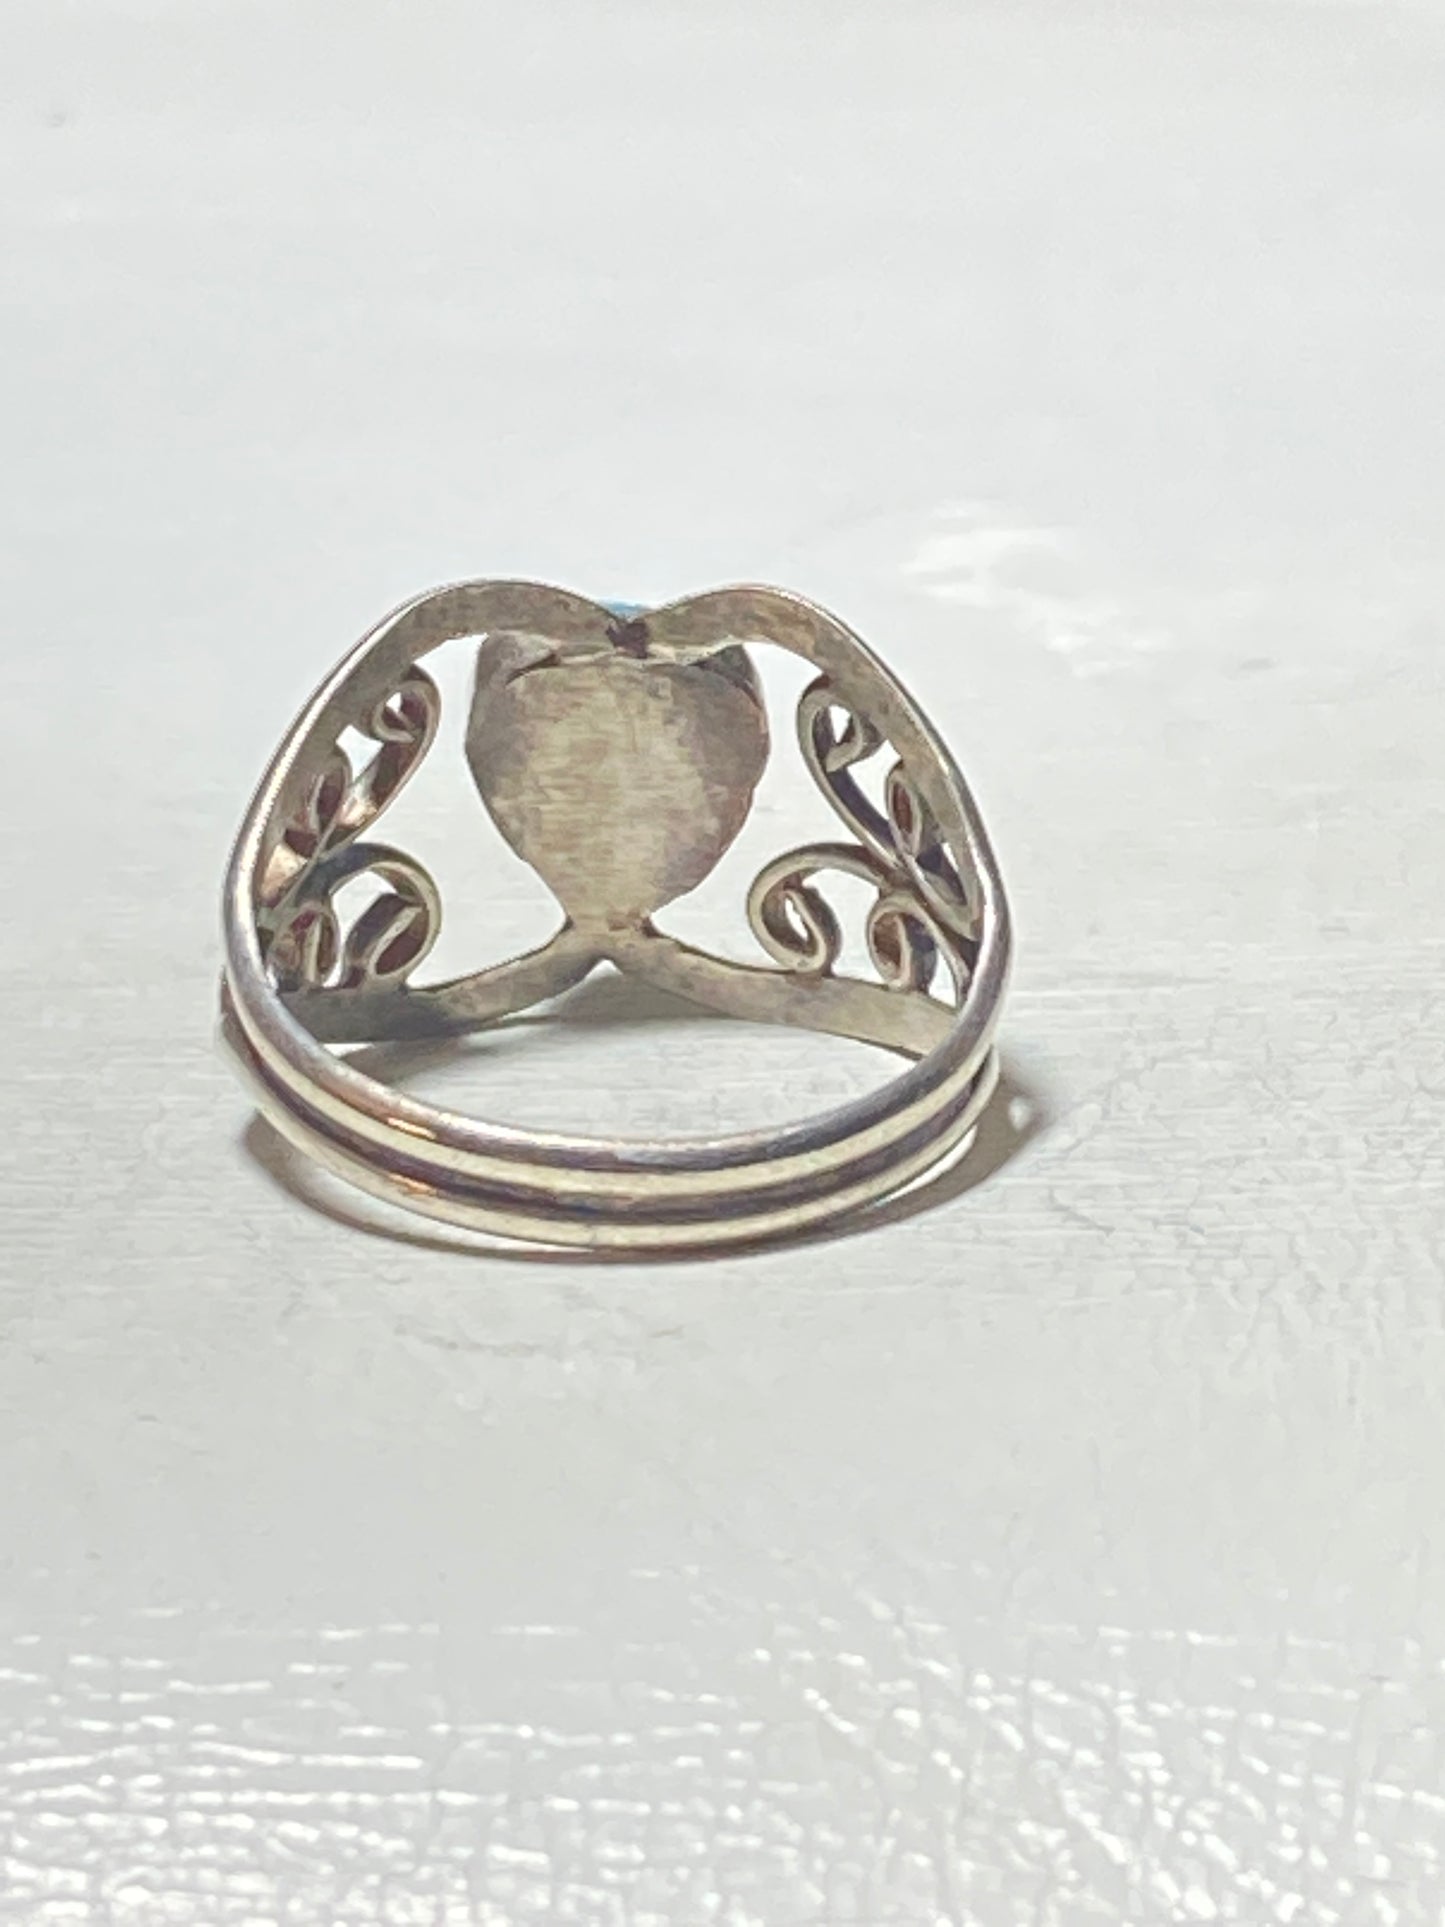 Turquoise ring heart pinky band southwest sterling silver girls women